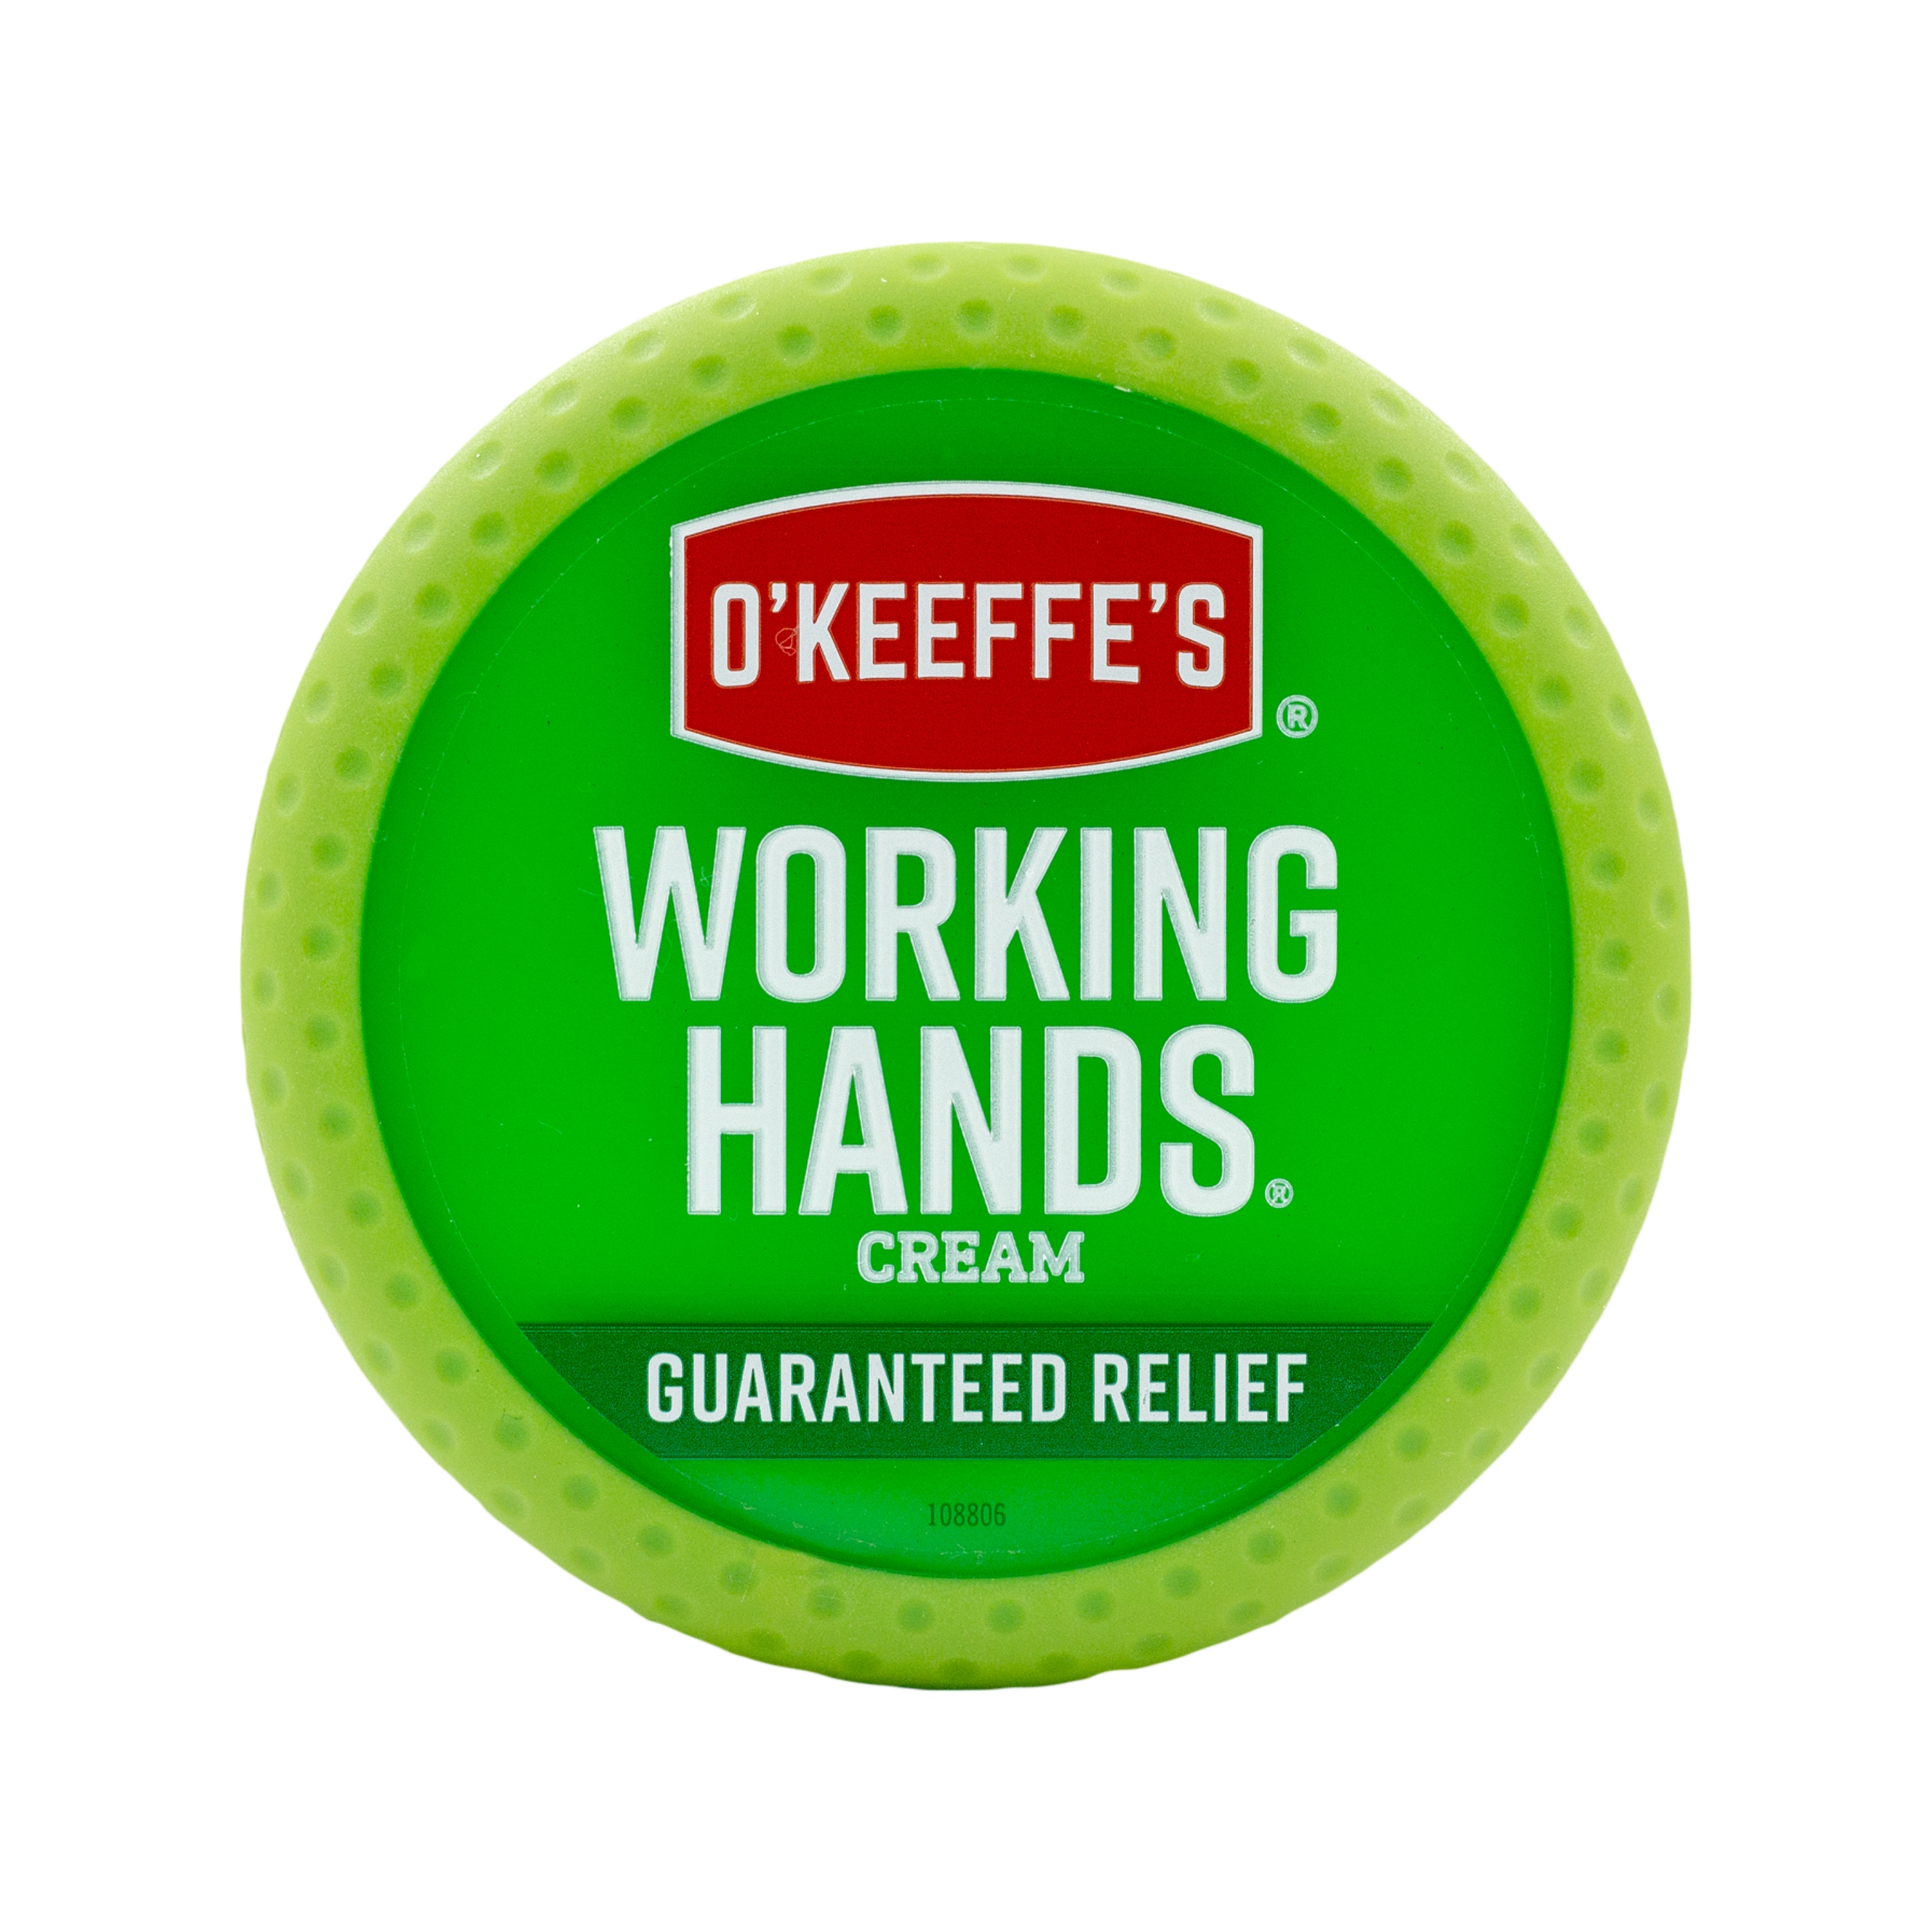 O'Keeffe's Working Hands Cream - Lee Valley Tools